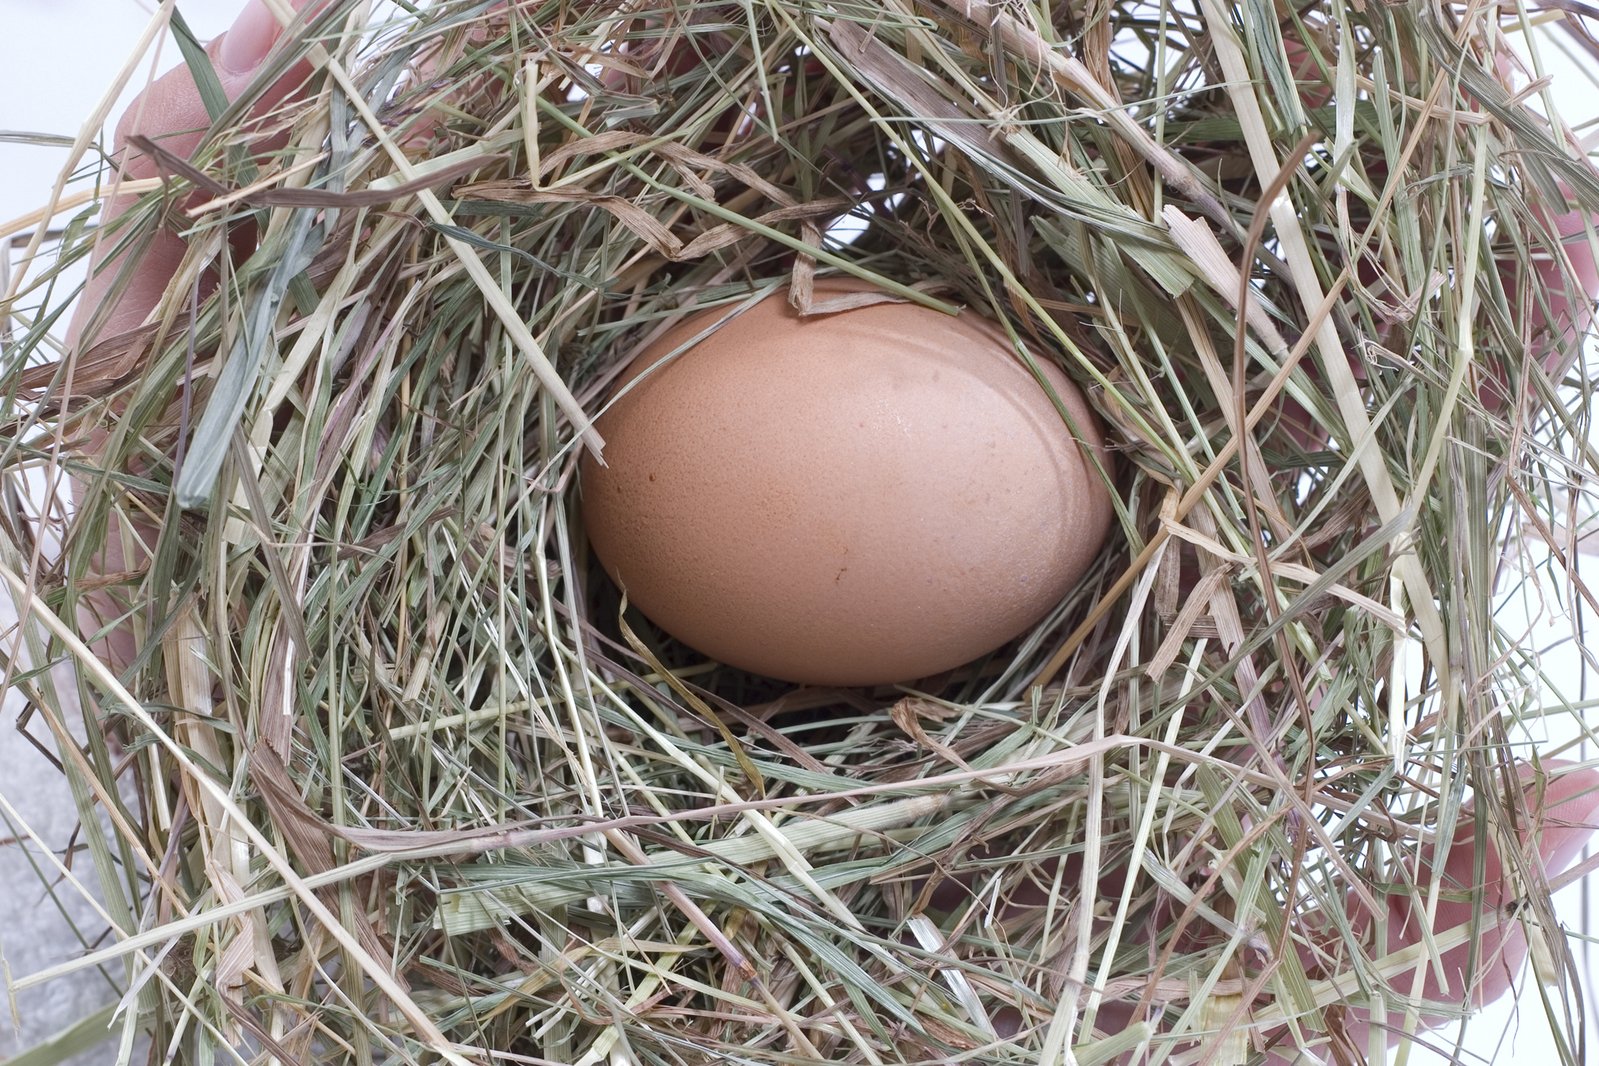 a bird's egg in a nest on top of grass